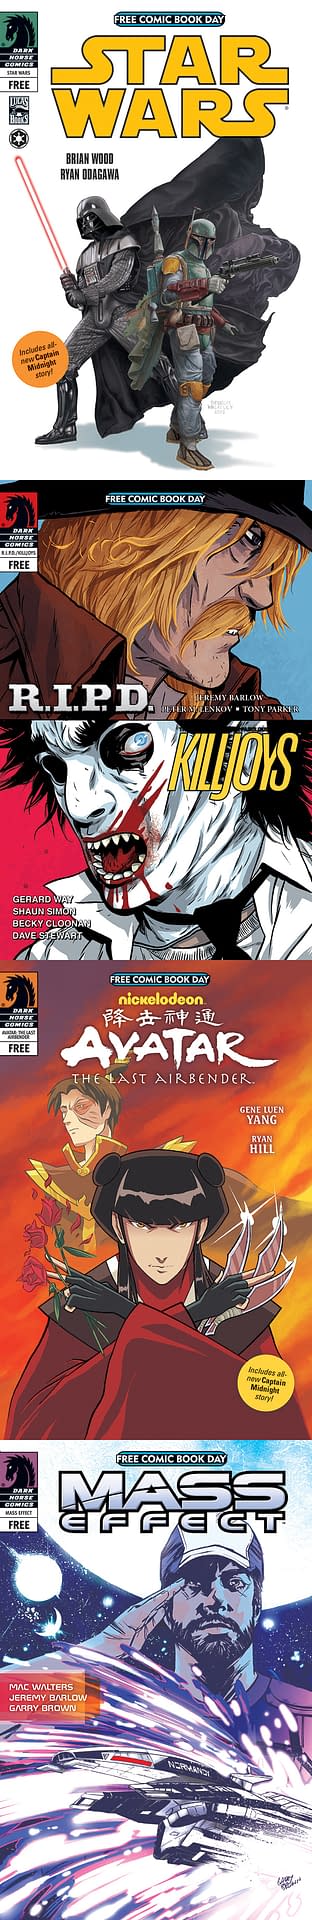 Two More Free Comic Book Day 2013 Titles From Dark Horse And IDW